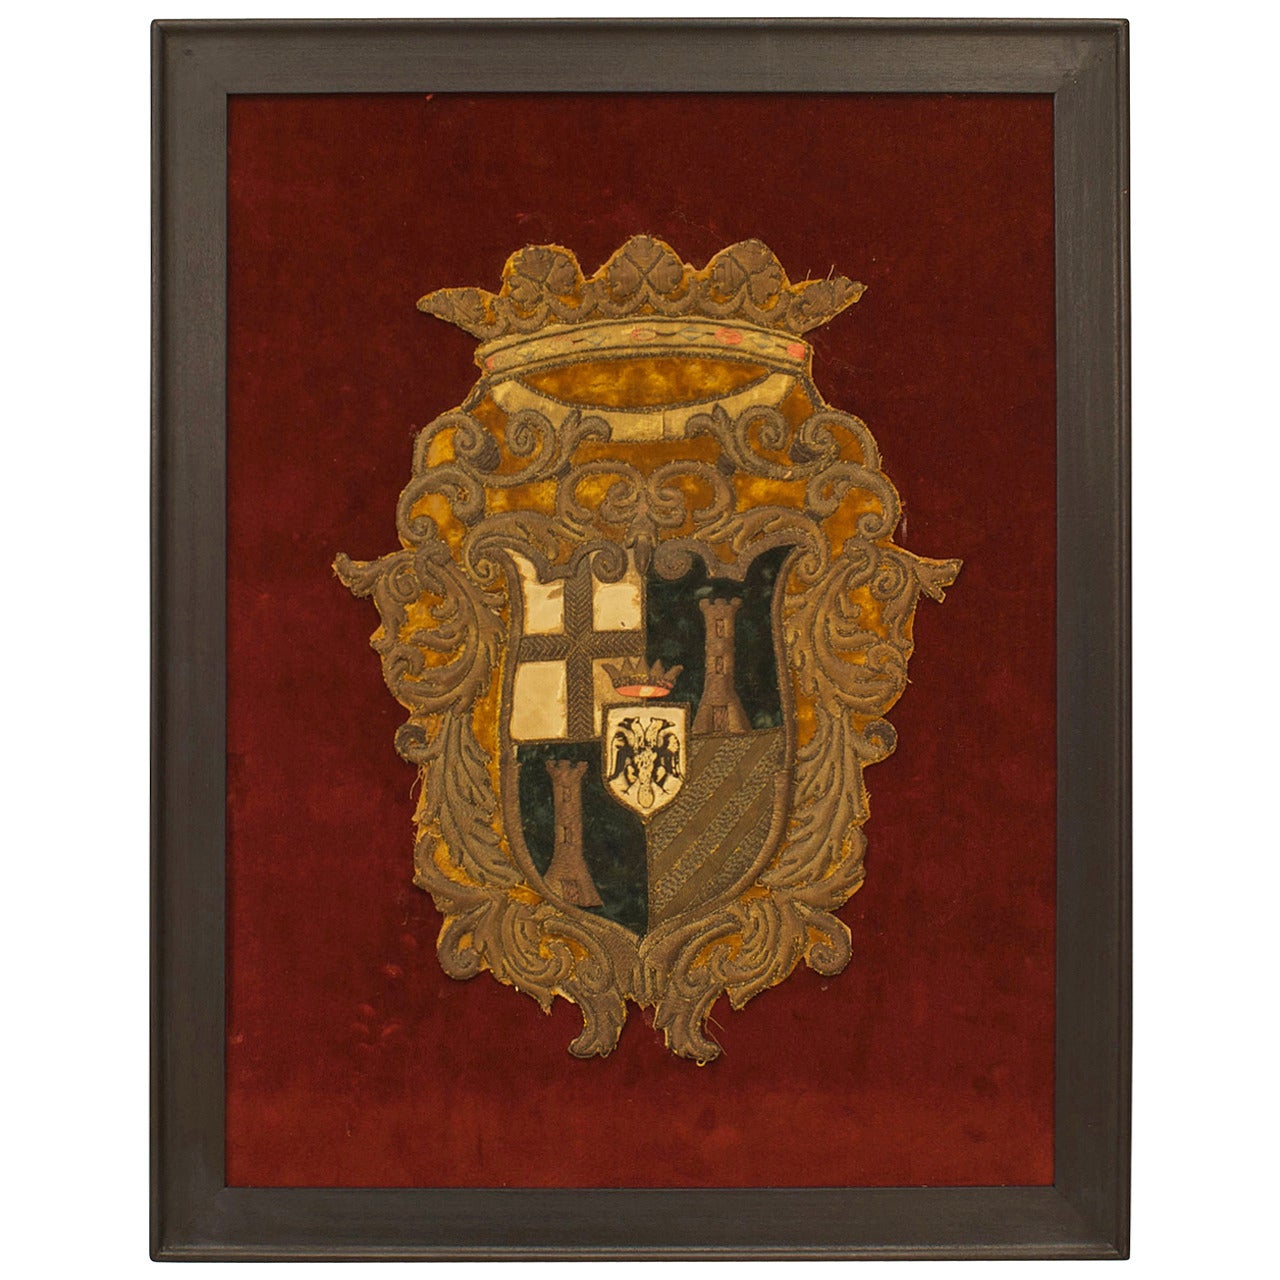 English Renaissance Framed Crest Embroidery